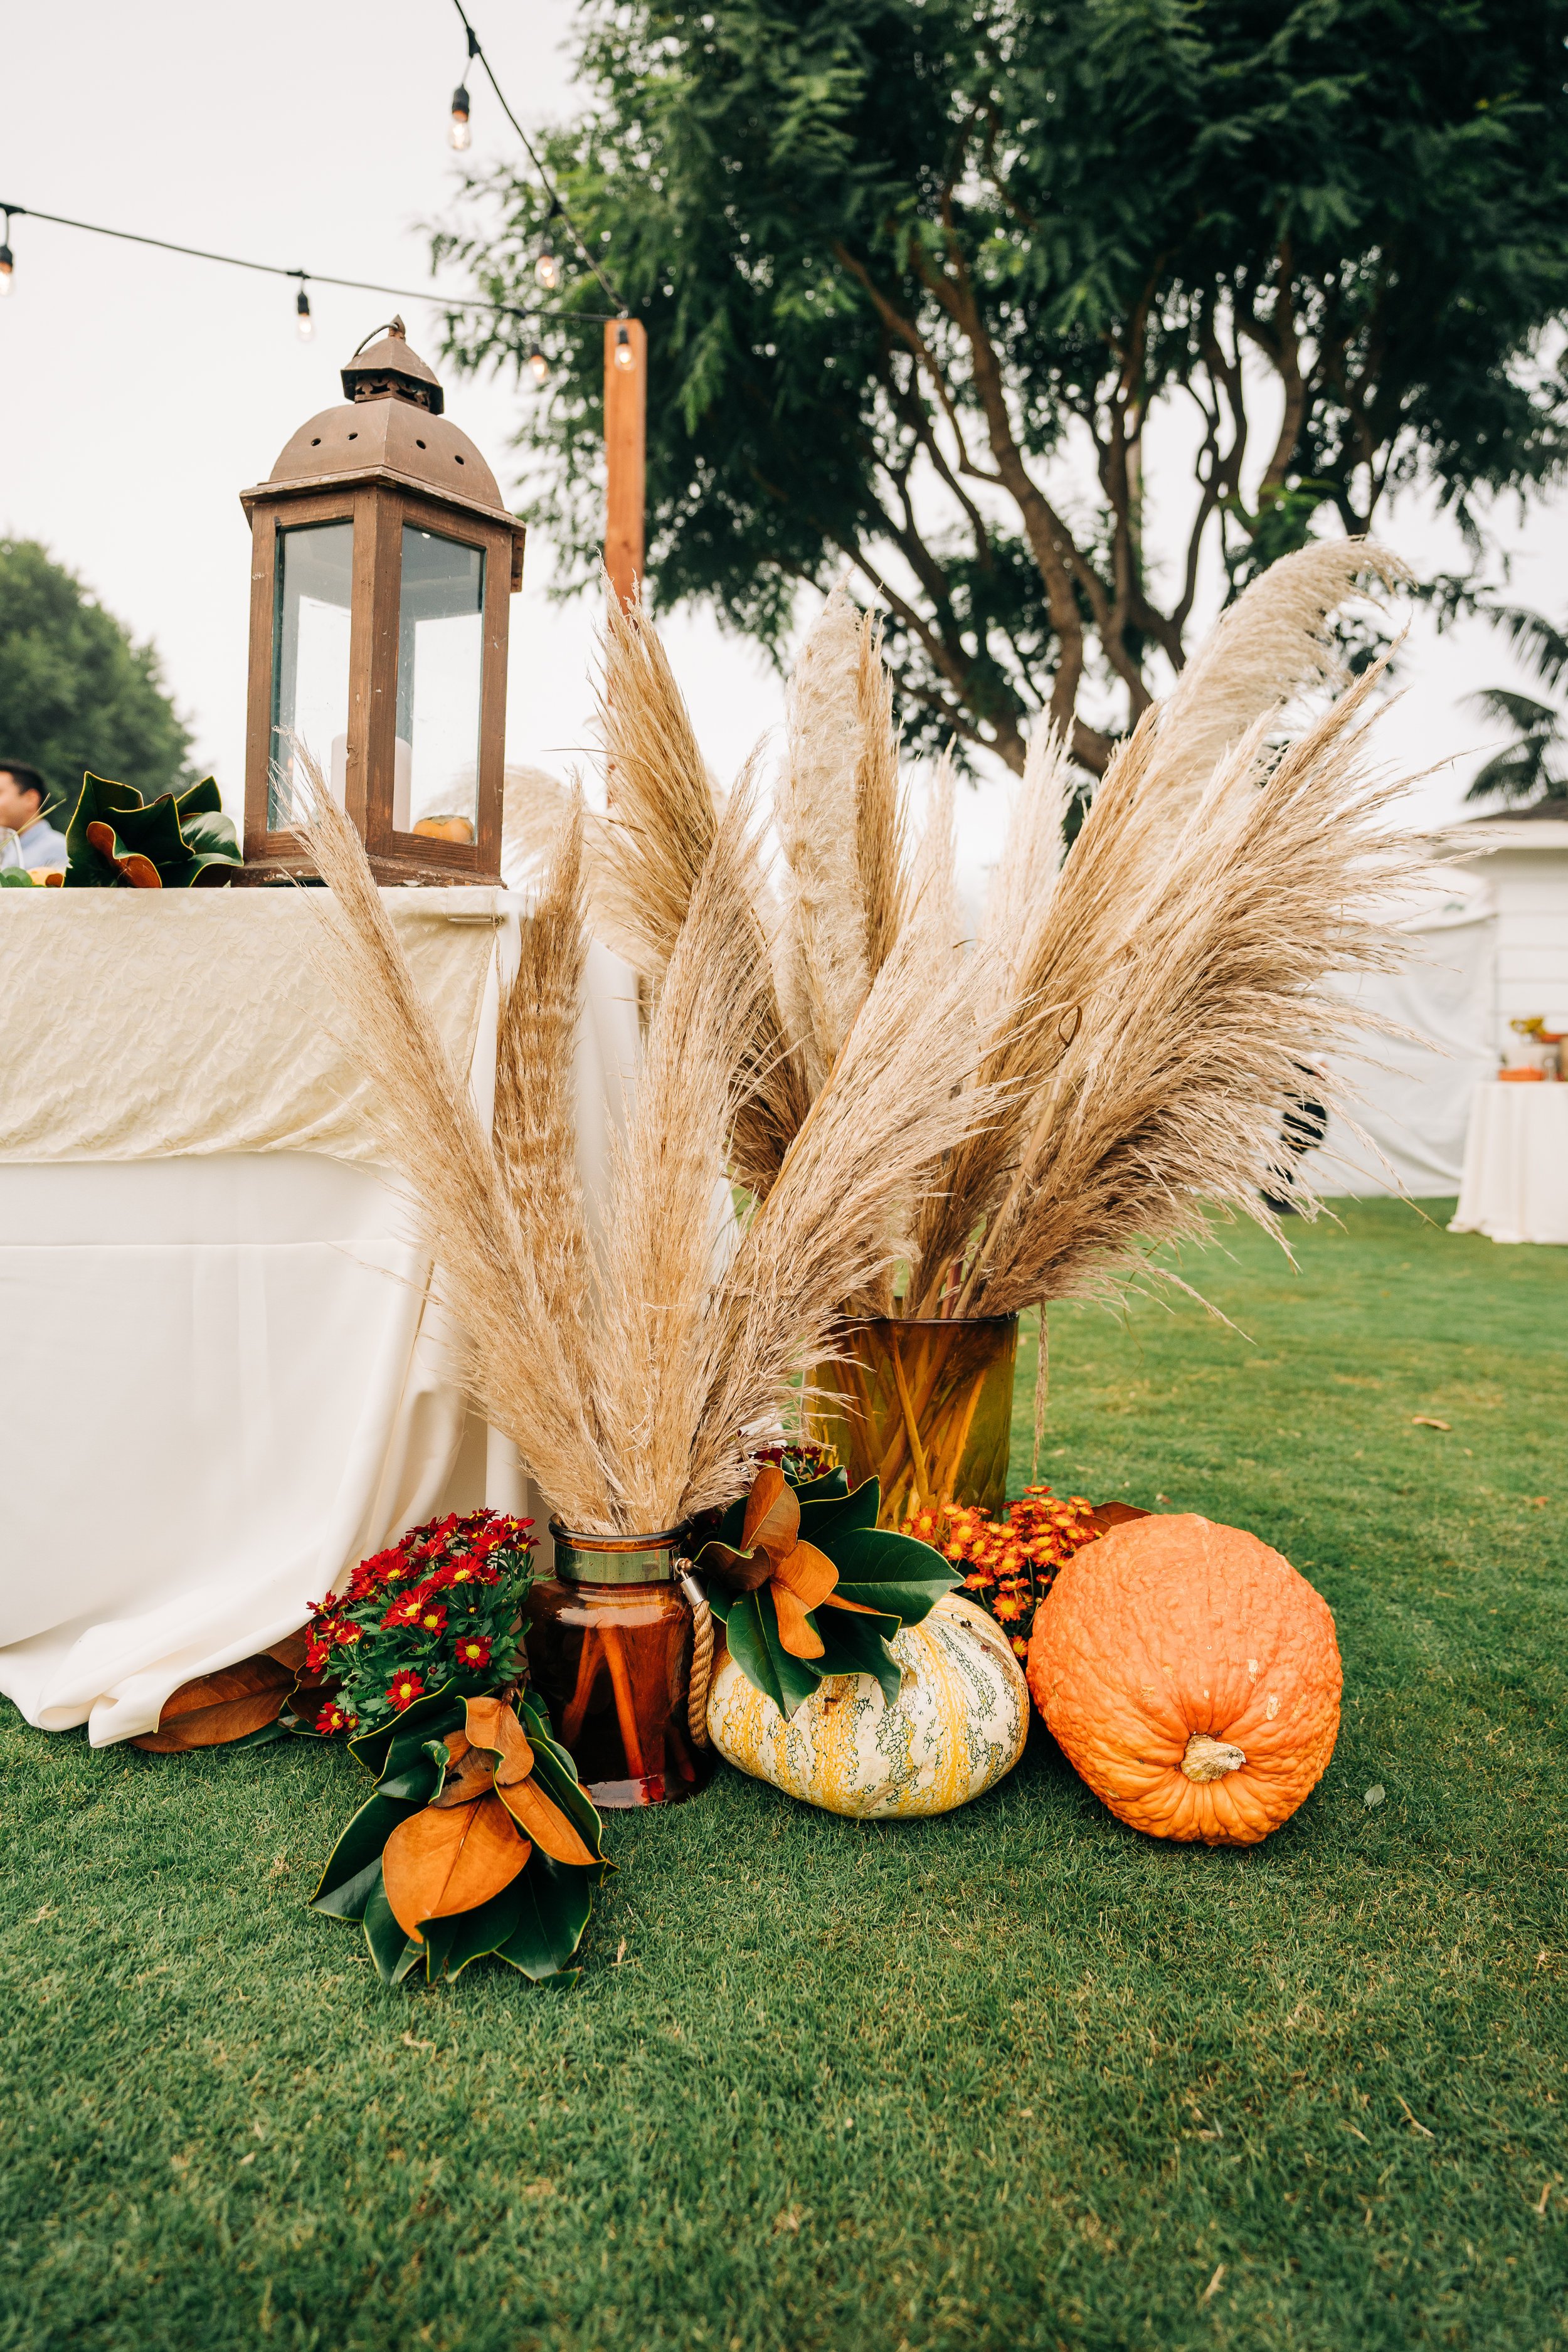 www.santabarbarawedding.com | Brandon Bibbins Photography | The Cottages at Polo Run | Bright Event Rentals | Fall Accents Display